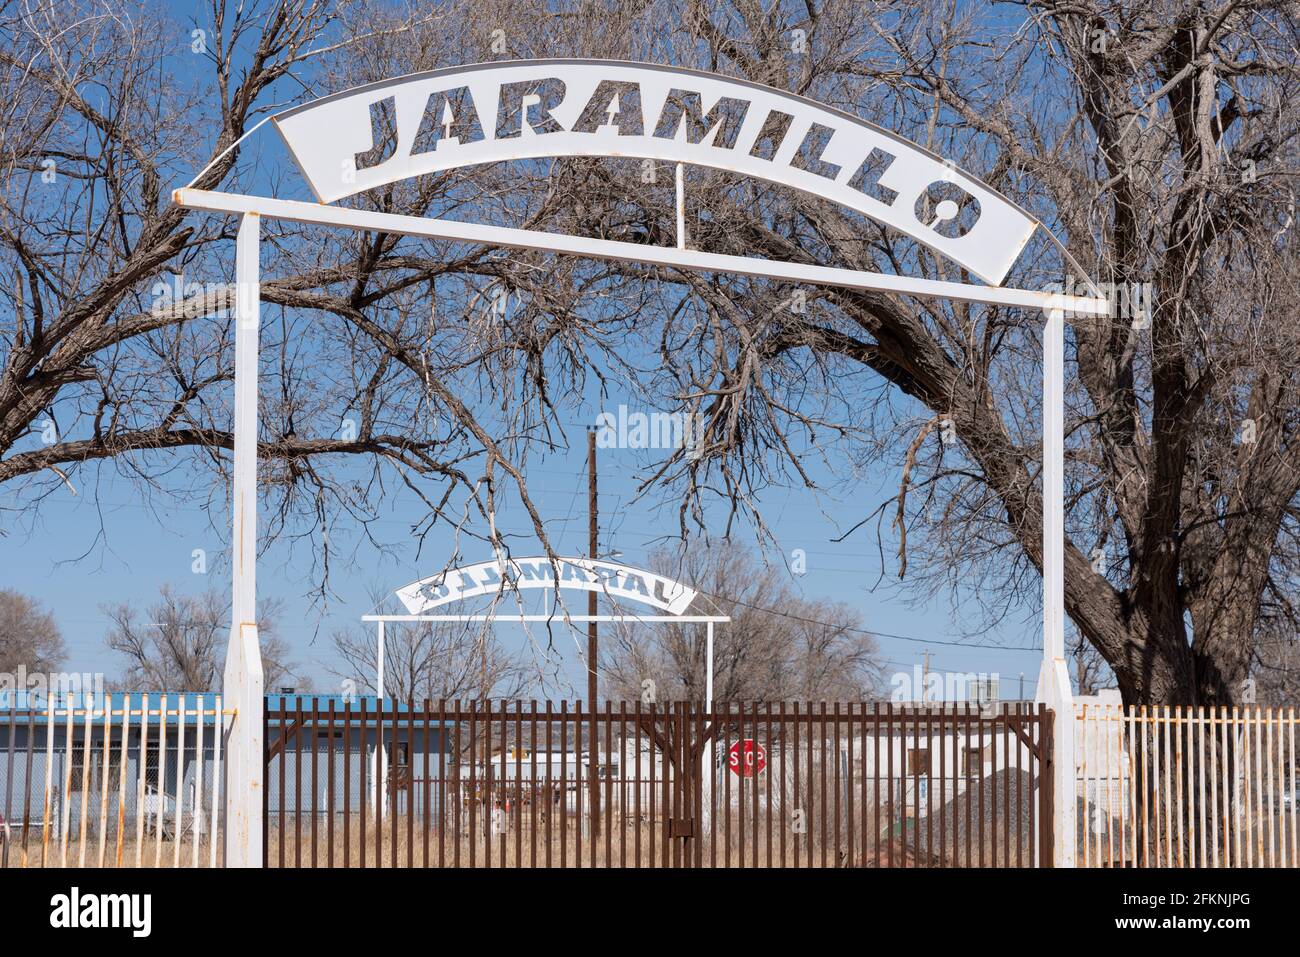 Two large white signs in Encino, New Mexico, that read “Jaramillo”, an old family name in Encino. Stock Photo